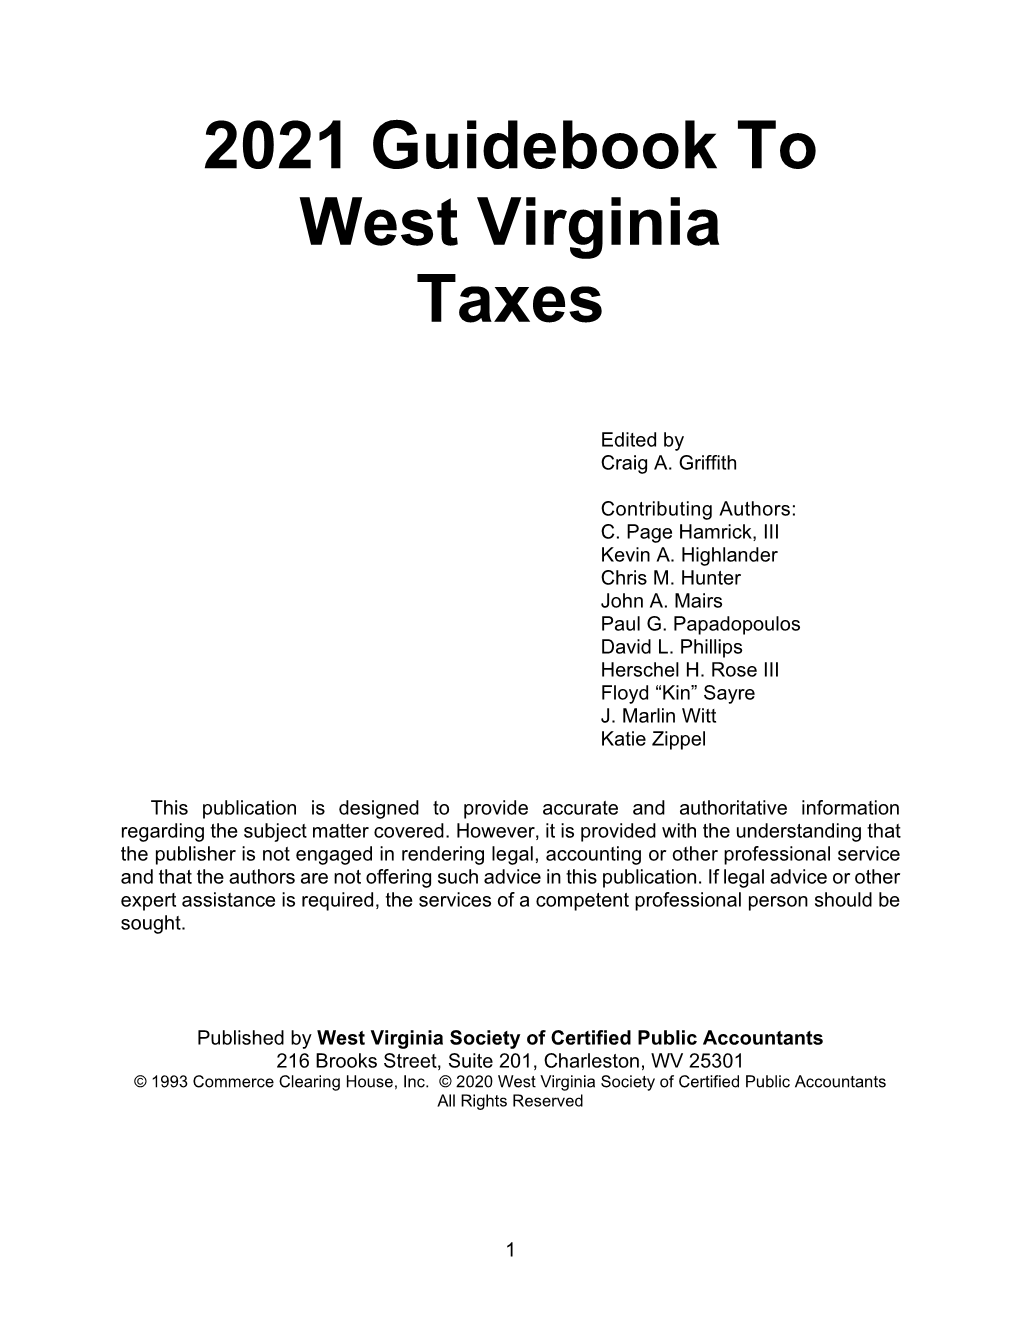 2021 Guidebook to West Virginia Taxes and Ensuing Editions